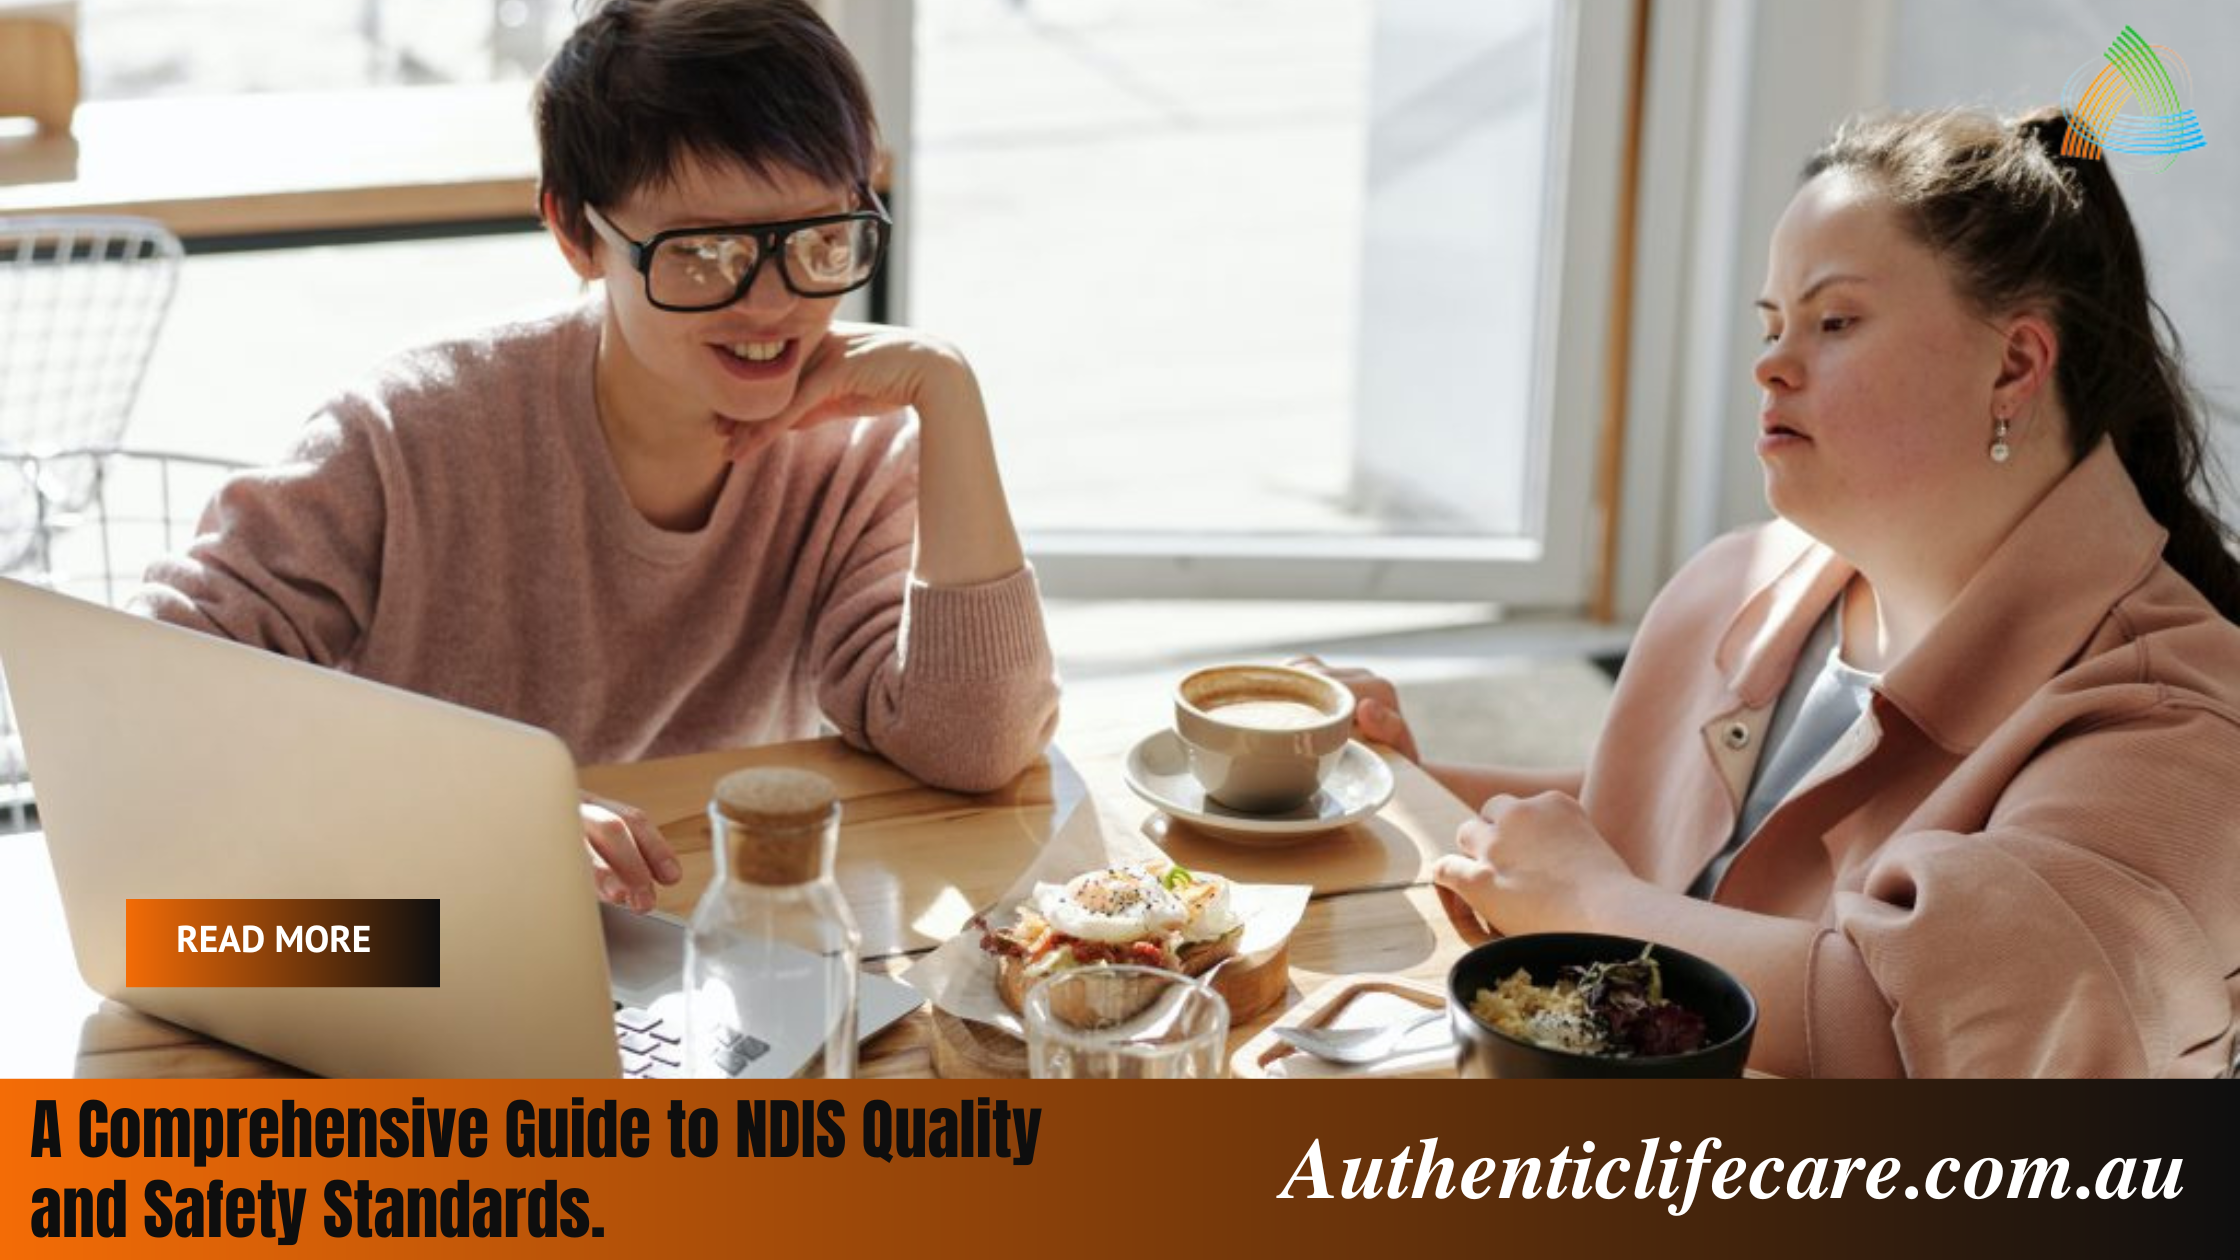 You are currently viewing A Comprehensive Guide to NDIS Quality and Safety Standards.